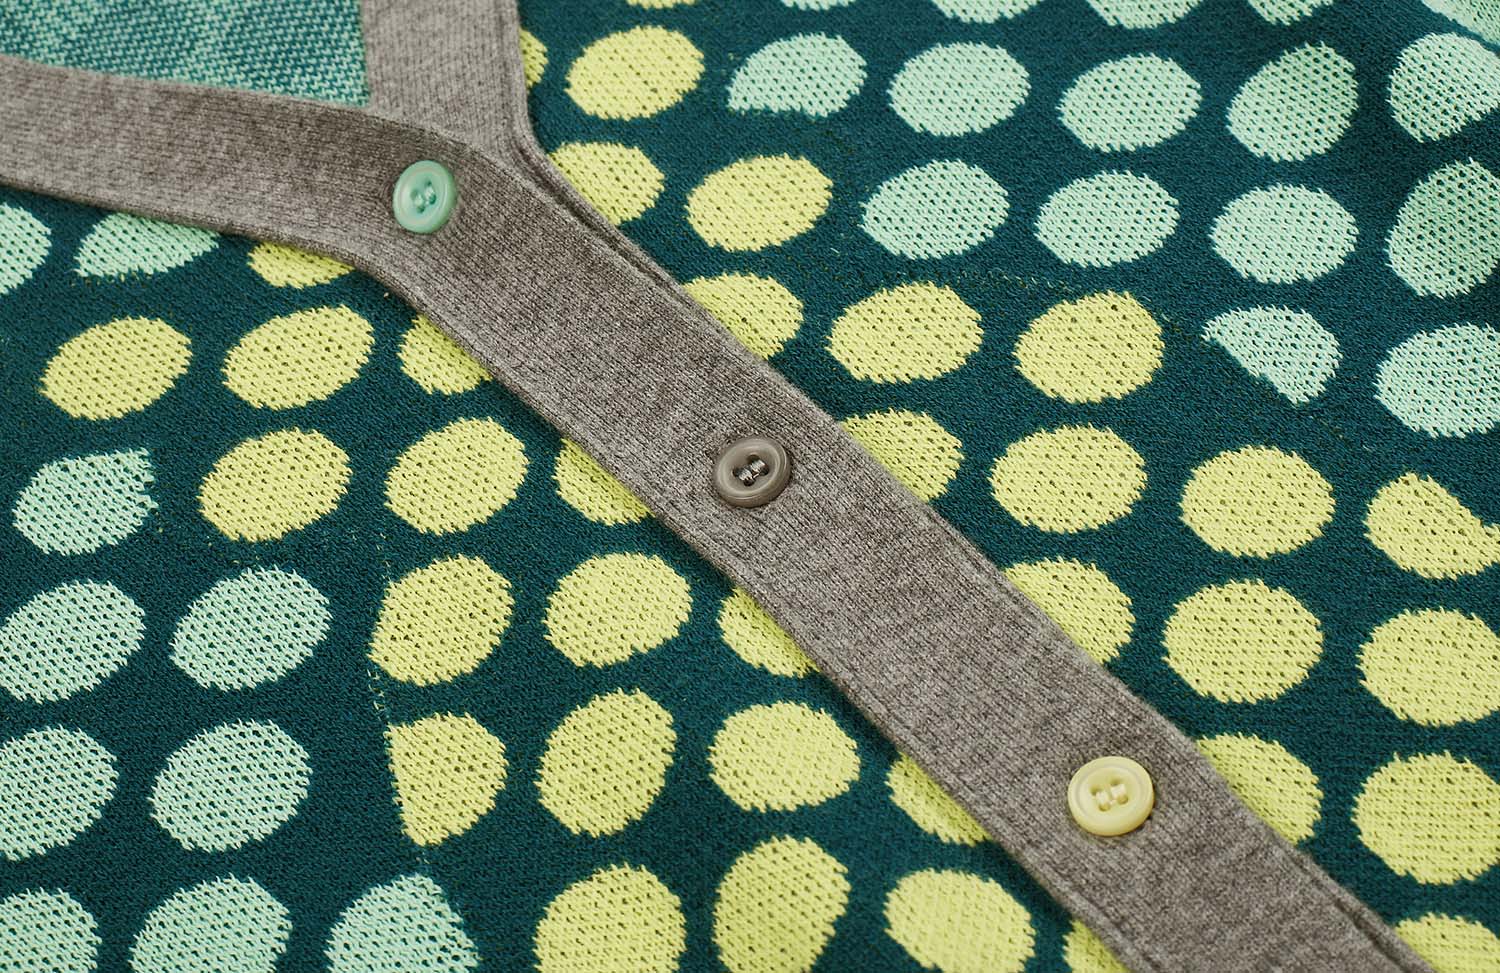 Cardigans / jnby by JNBY Cropped Polka-Dots Bear Cardigan